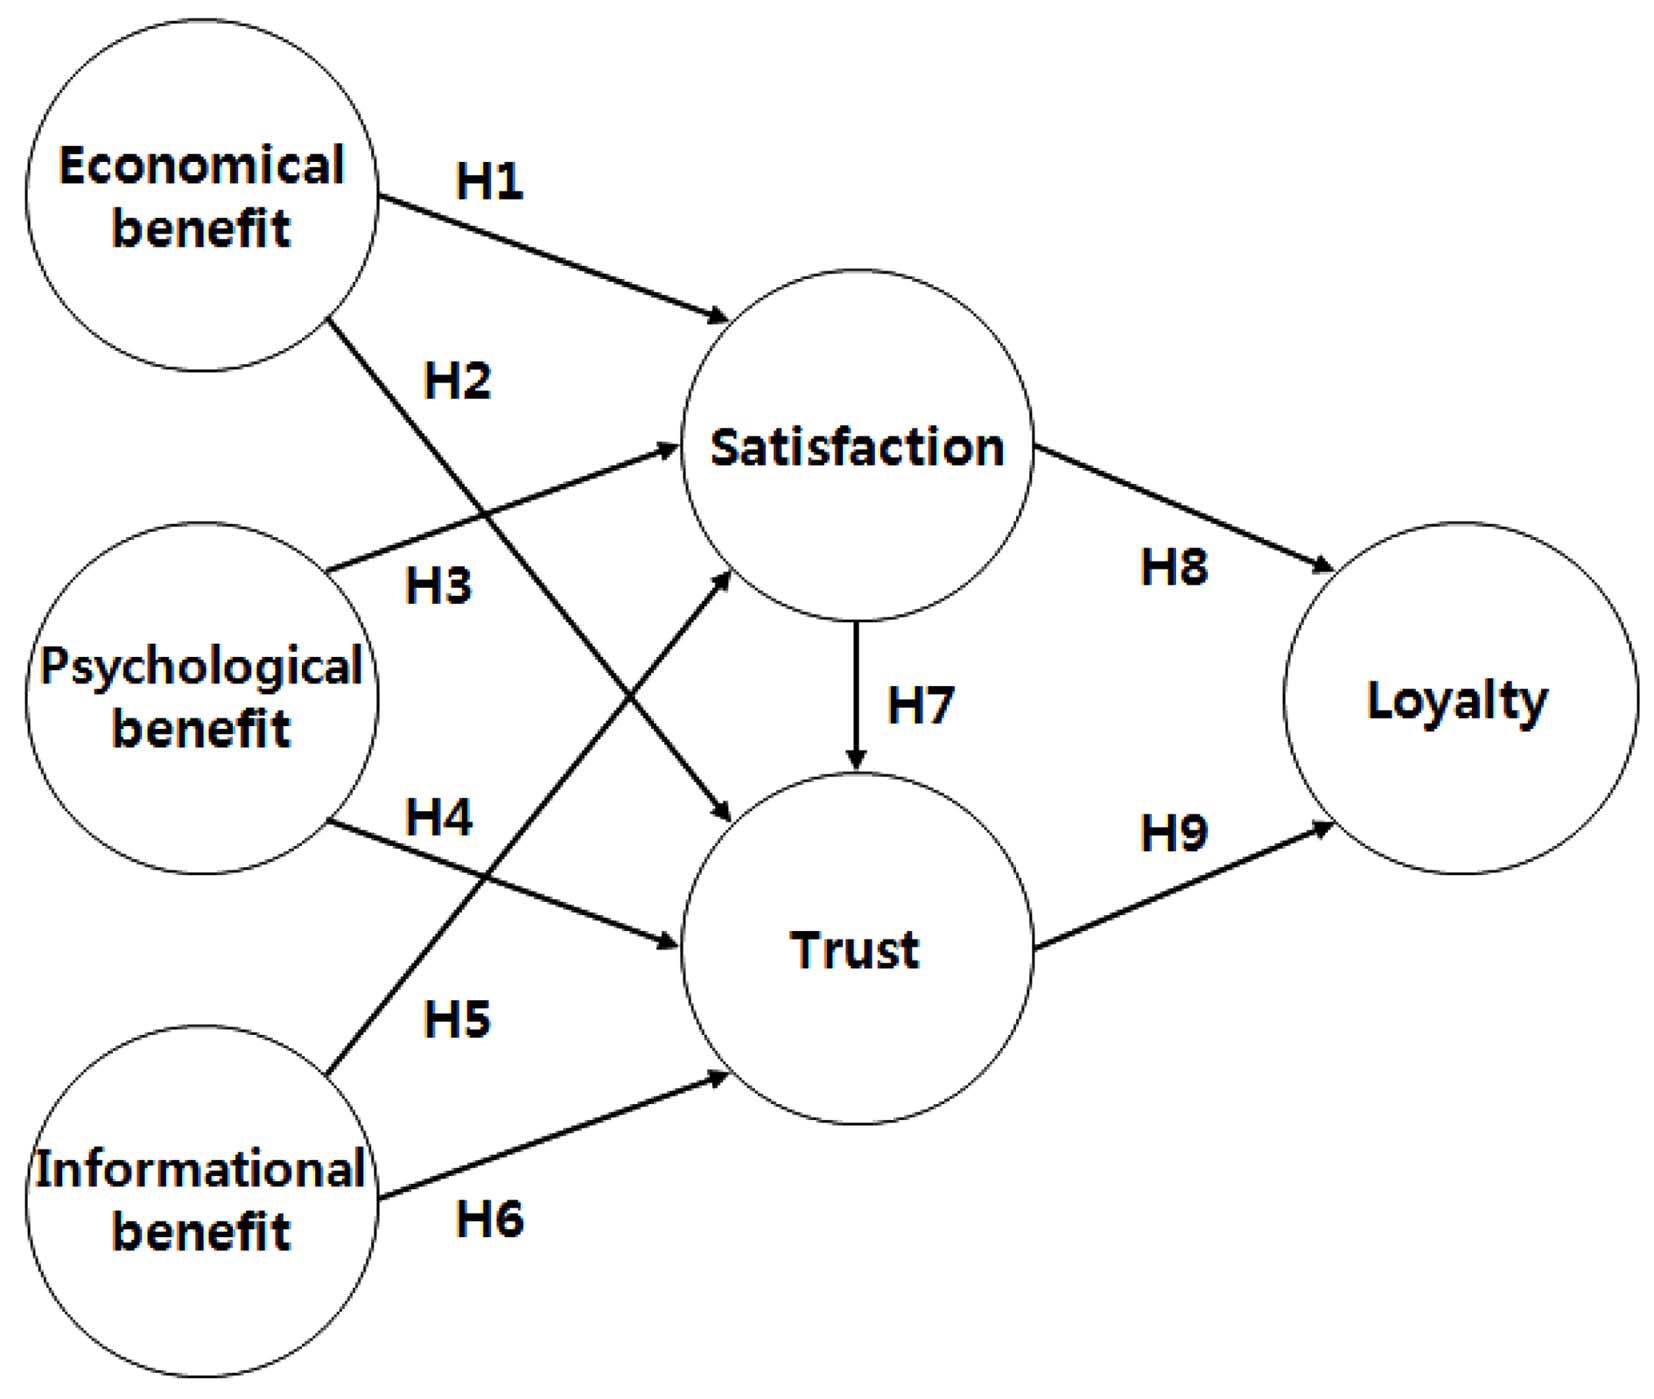 Research model and hypotheses.